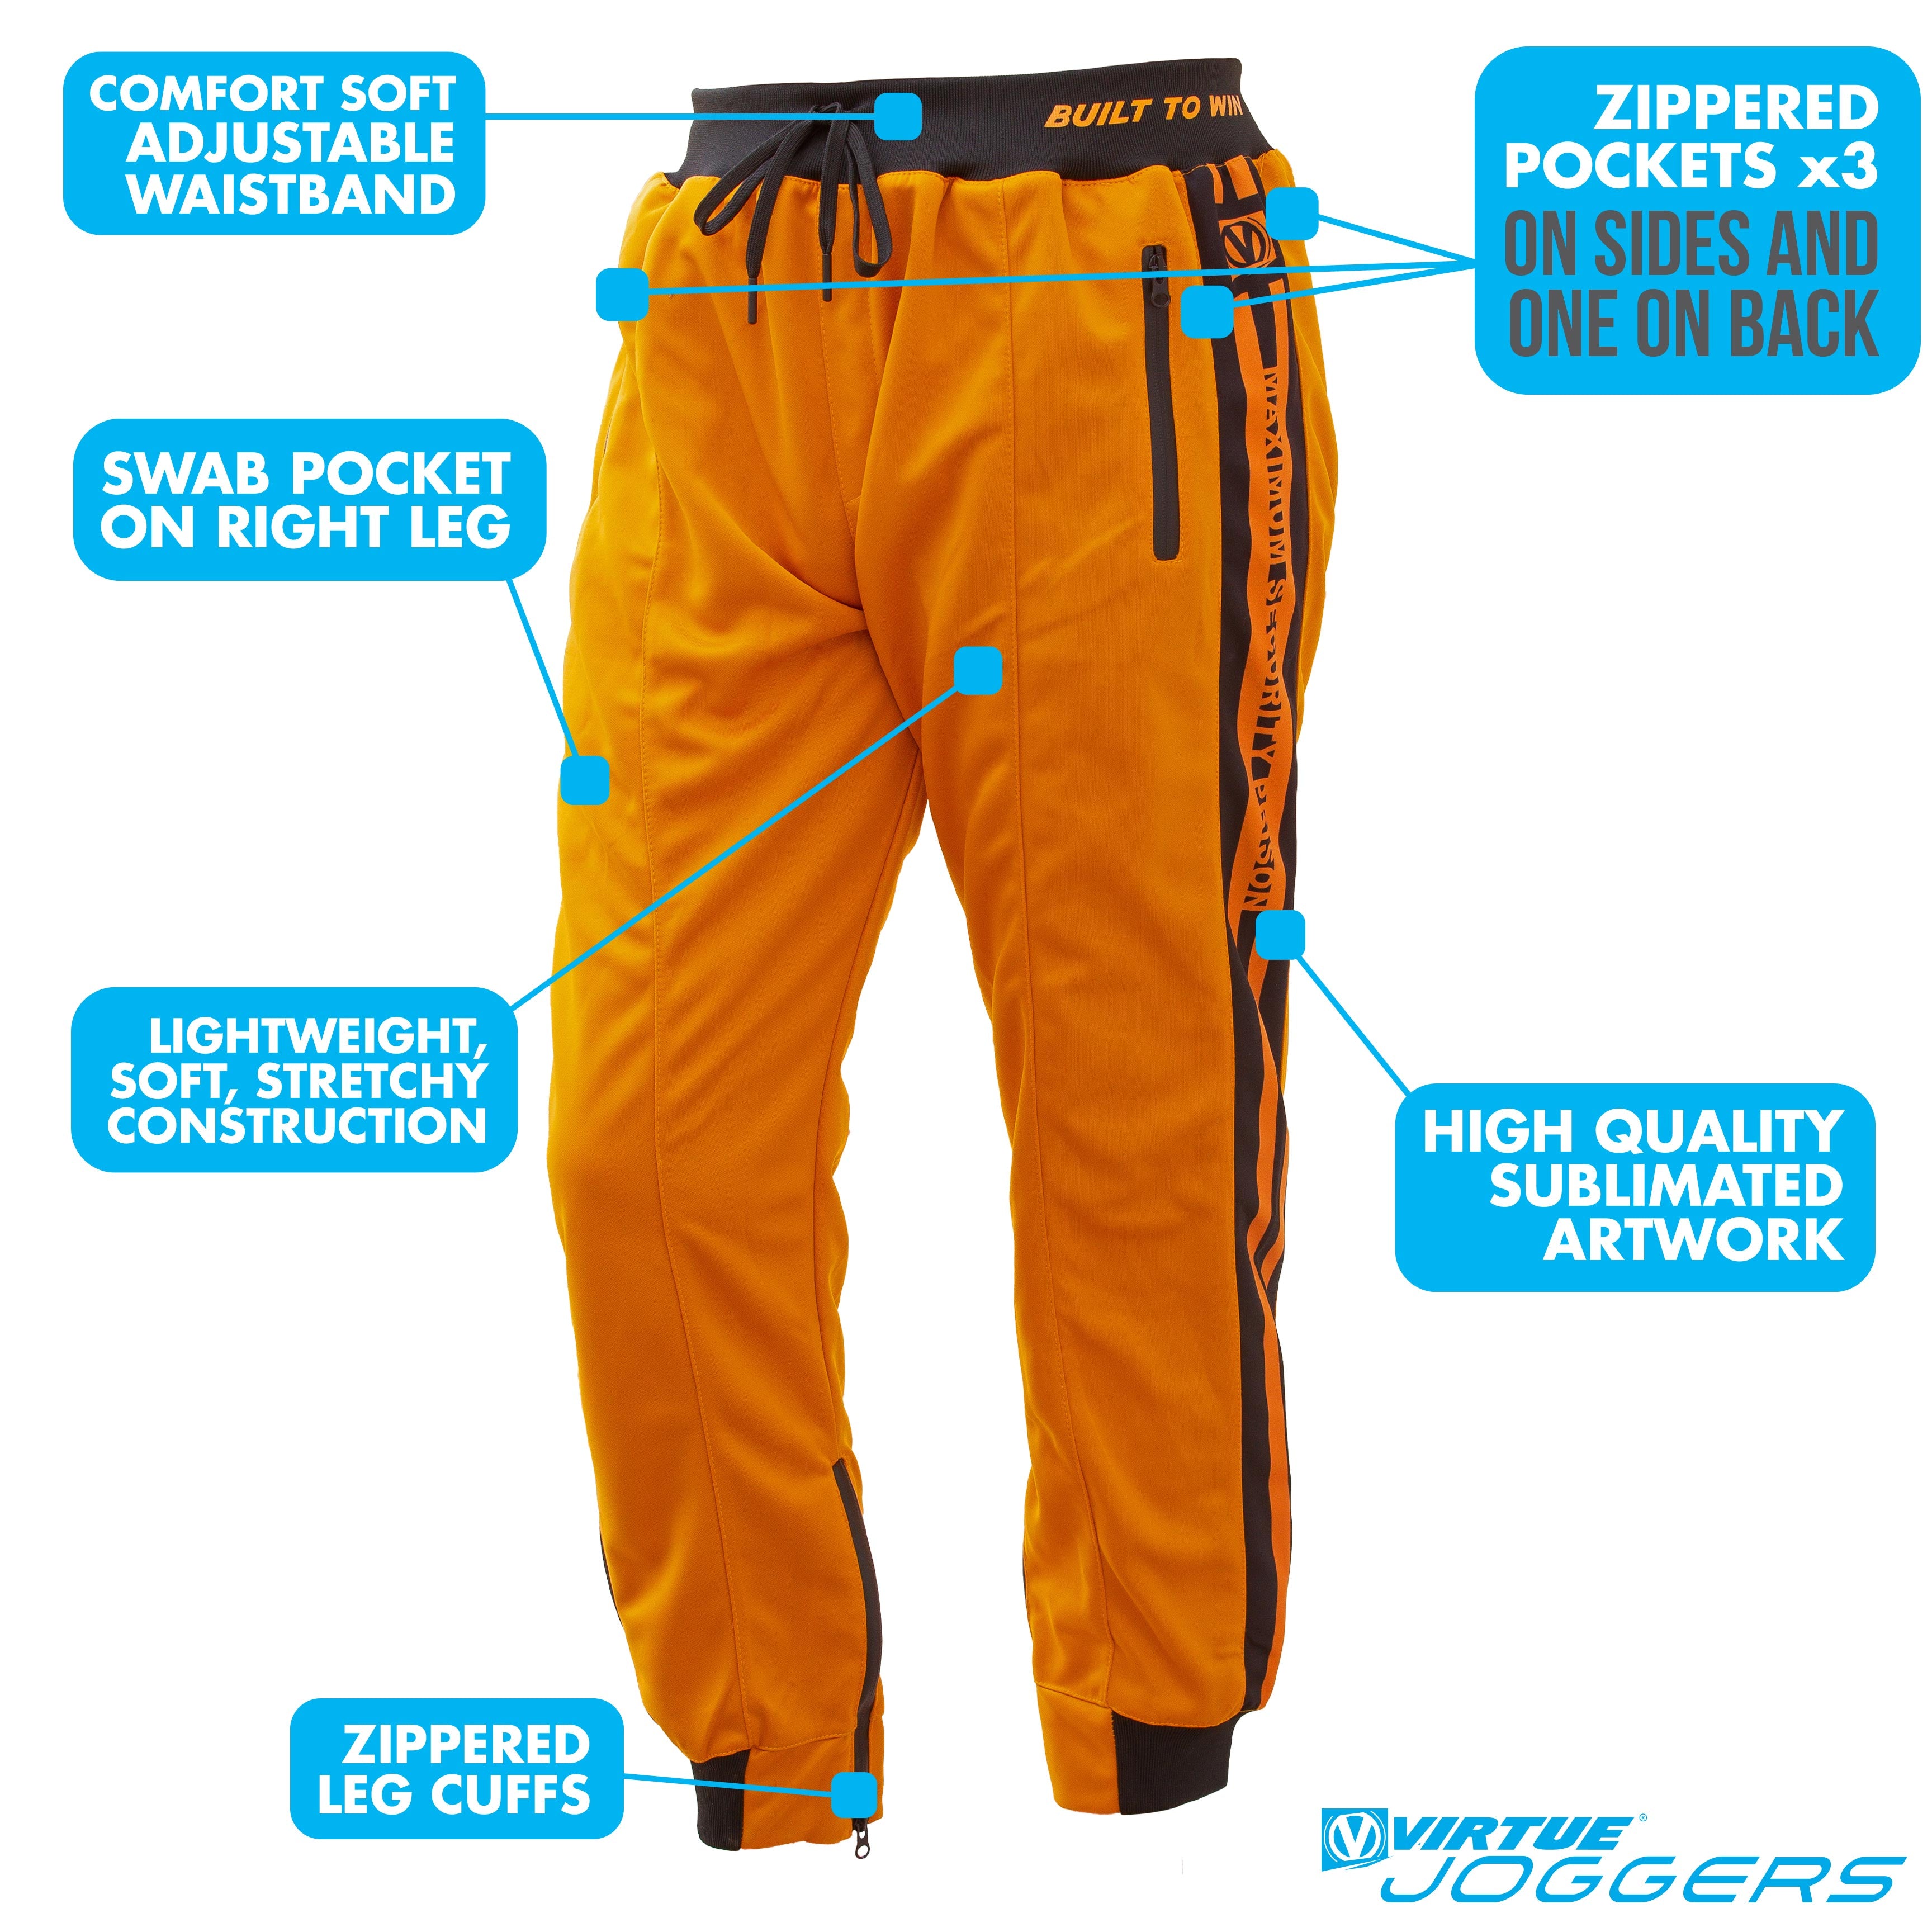 Stay Stylish and Comfortable with Our Jogger Pants